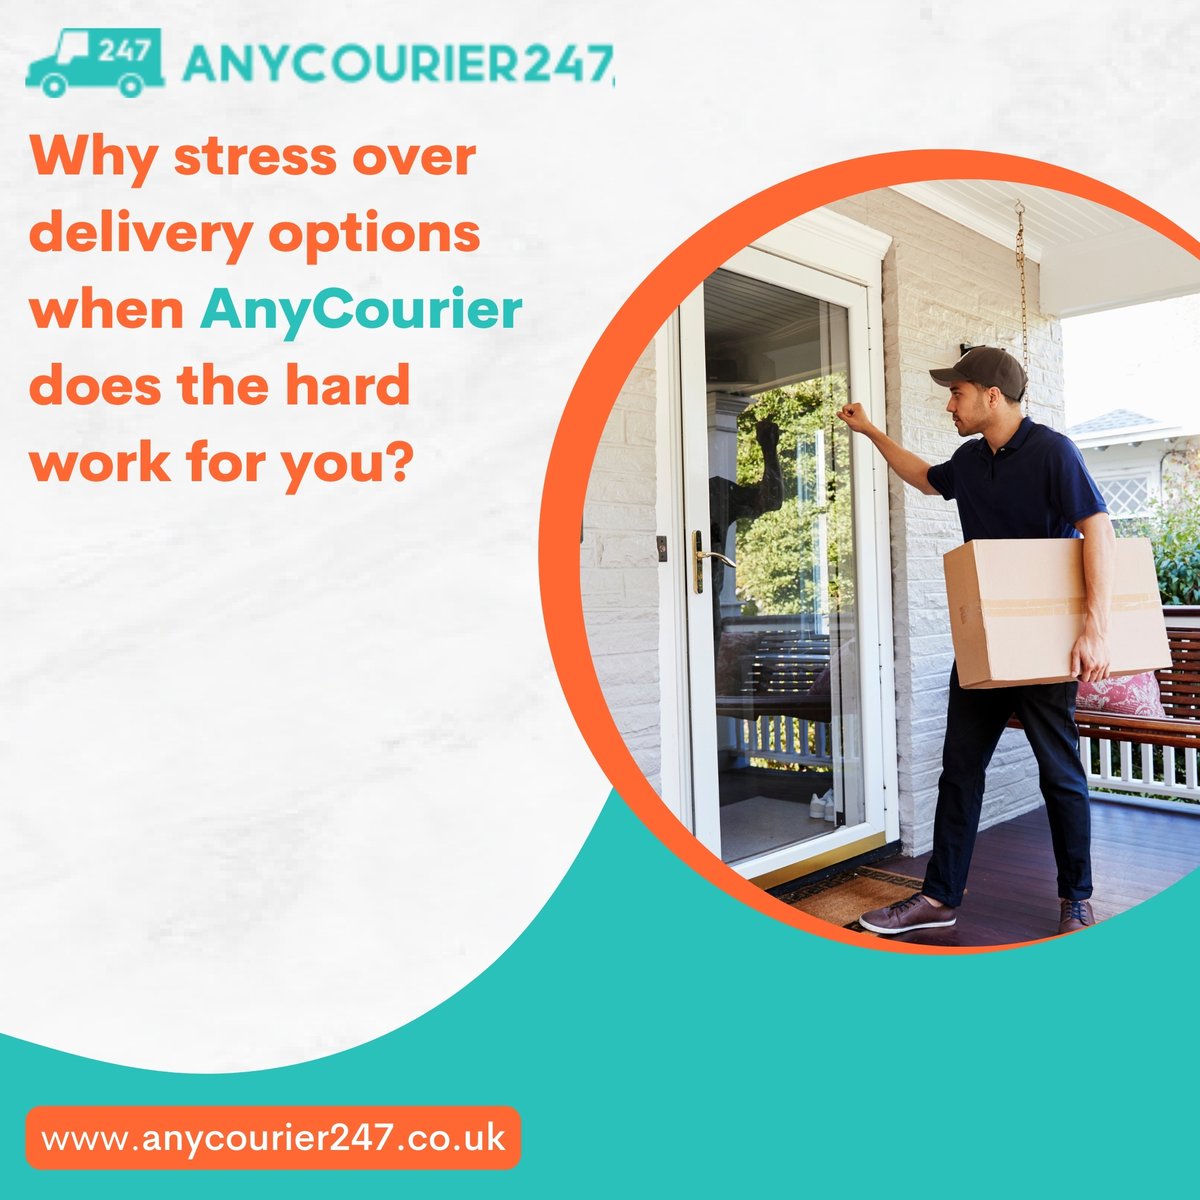 Don't sweat the small stuff when it comes to delivery 📦 Let AnyCourier handle the heavy lifting for you! Sit back, relax, and let us take care of the rest. 🚚 #StressFreeDelivery #AnyCourierToTheRescue
#anycourier247 #couriermarketplace #trustedcouriers #logisticssolution